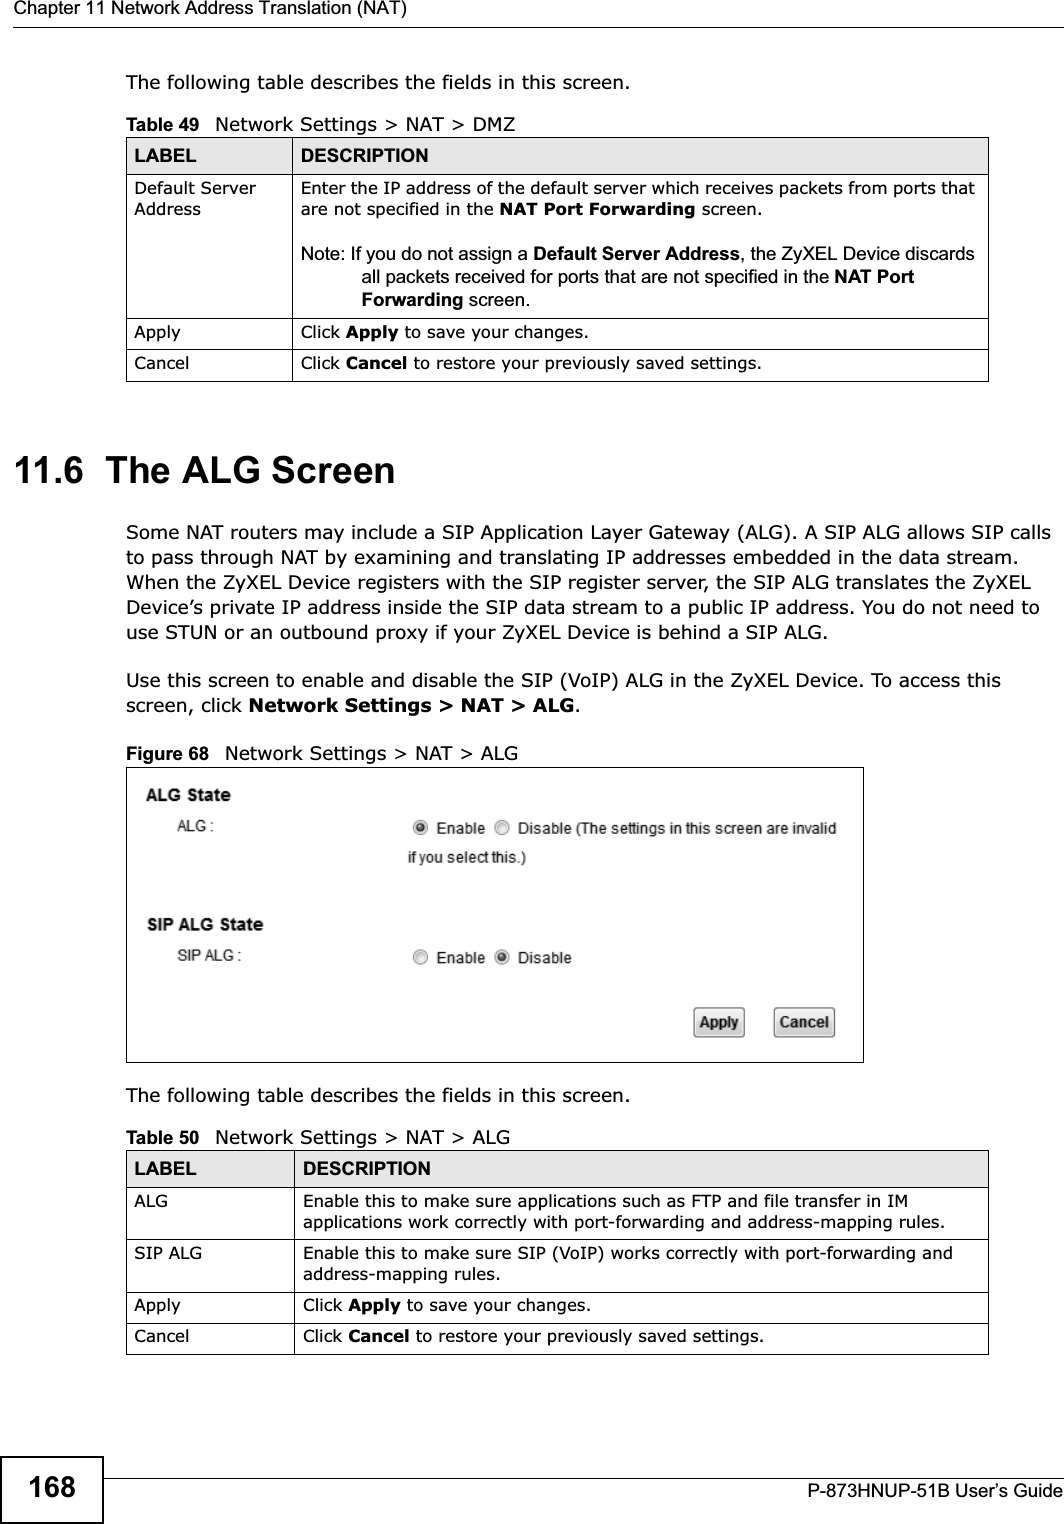 Chapter 11 Network Address Translation (NAT)P-873HNUP-51B User’s Guide168The following table describes the fields in this screen. 11.6  The ALG ScreenSome NAT routers may include a SIP Application Layer Gateway (ALG). A SIP ALG allows SIP calls to pass through NAT by examining and translating IP addresses embedded in the data stream. When the ZyXEL Device registers with the SIP register server, the SIP ALG translates the ZyXEL Device’s private IP address inside the SIP data stream to a public IP address. You do not need to use STUN or an outbound proxy if your ZyXEL Device is behind a SIP ALG.Use this screen to enable and disable the SIP (VoIP) ALG in the ZyXEL Device. To access this screen, click Network Settings &gt; NAT &gt; ALG.Figure 68   Network Settings &gt; NAT &gt; ALGThe following table describes the fields in this screen.Table 49   Network Settings &gt; NAT &gt; DMZLABEL DESCRIPTIONDefault Server AddressEnter the IP address of the default server which receives packets from ports that are not specified in the NAT Port Forwarding screen. Note: If you do not assign a Default Server Address, the ZyXEL Device discards all packets received for ports that are not specified in the NAT Port Forwarding screen.Apply Click Apply to save your changes.Cancel Click Cancel to restore your previously saved settings.Table 50   Network Settings &gt; NAT &gt; ALGLABEL DESCRIPTIONALG Enable this to make sure applications such as FTP and file transfer in IM applications work correctly with port-forwarding and address-mapping rules.SIP ALG Enable this to make sure SIP (VoIP) works correctly with port-forwarding and address-mapping rules.Apply Click Apply to save your changes.Cancel Click Cancel to restore your previously saved settings.